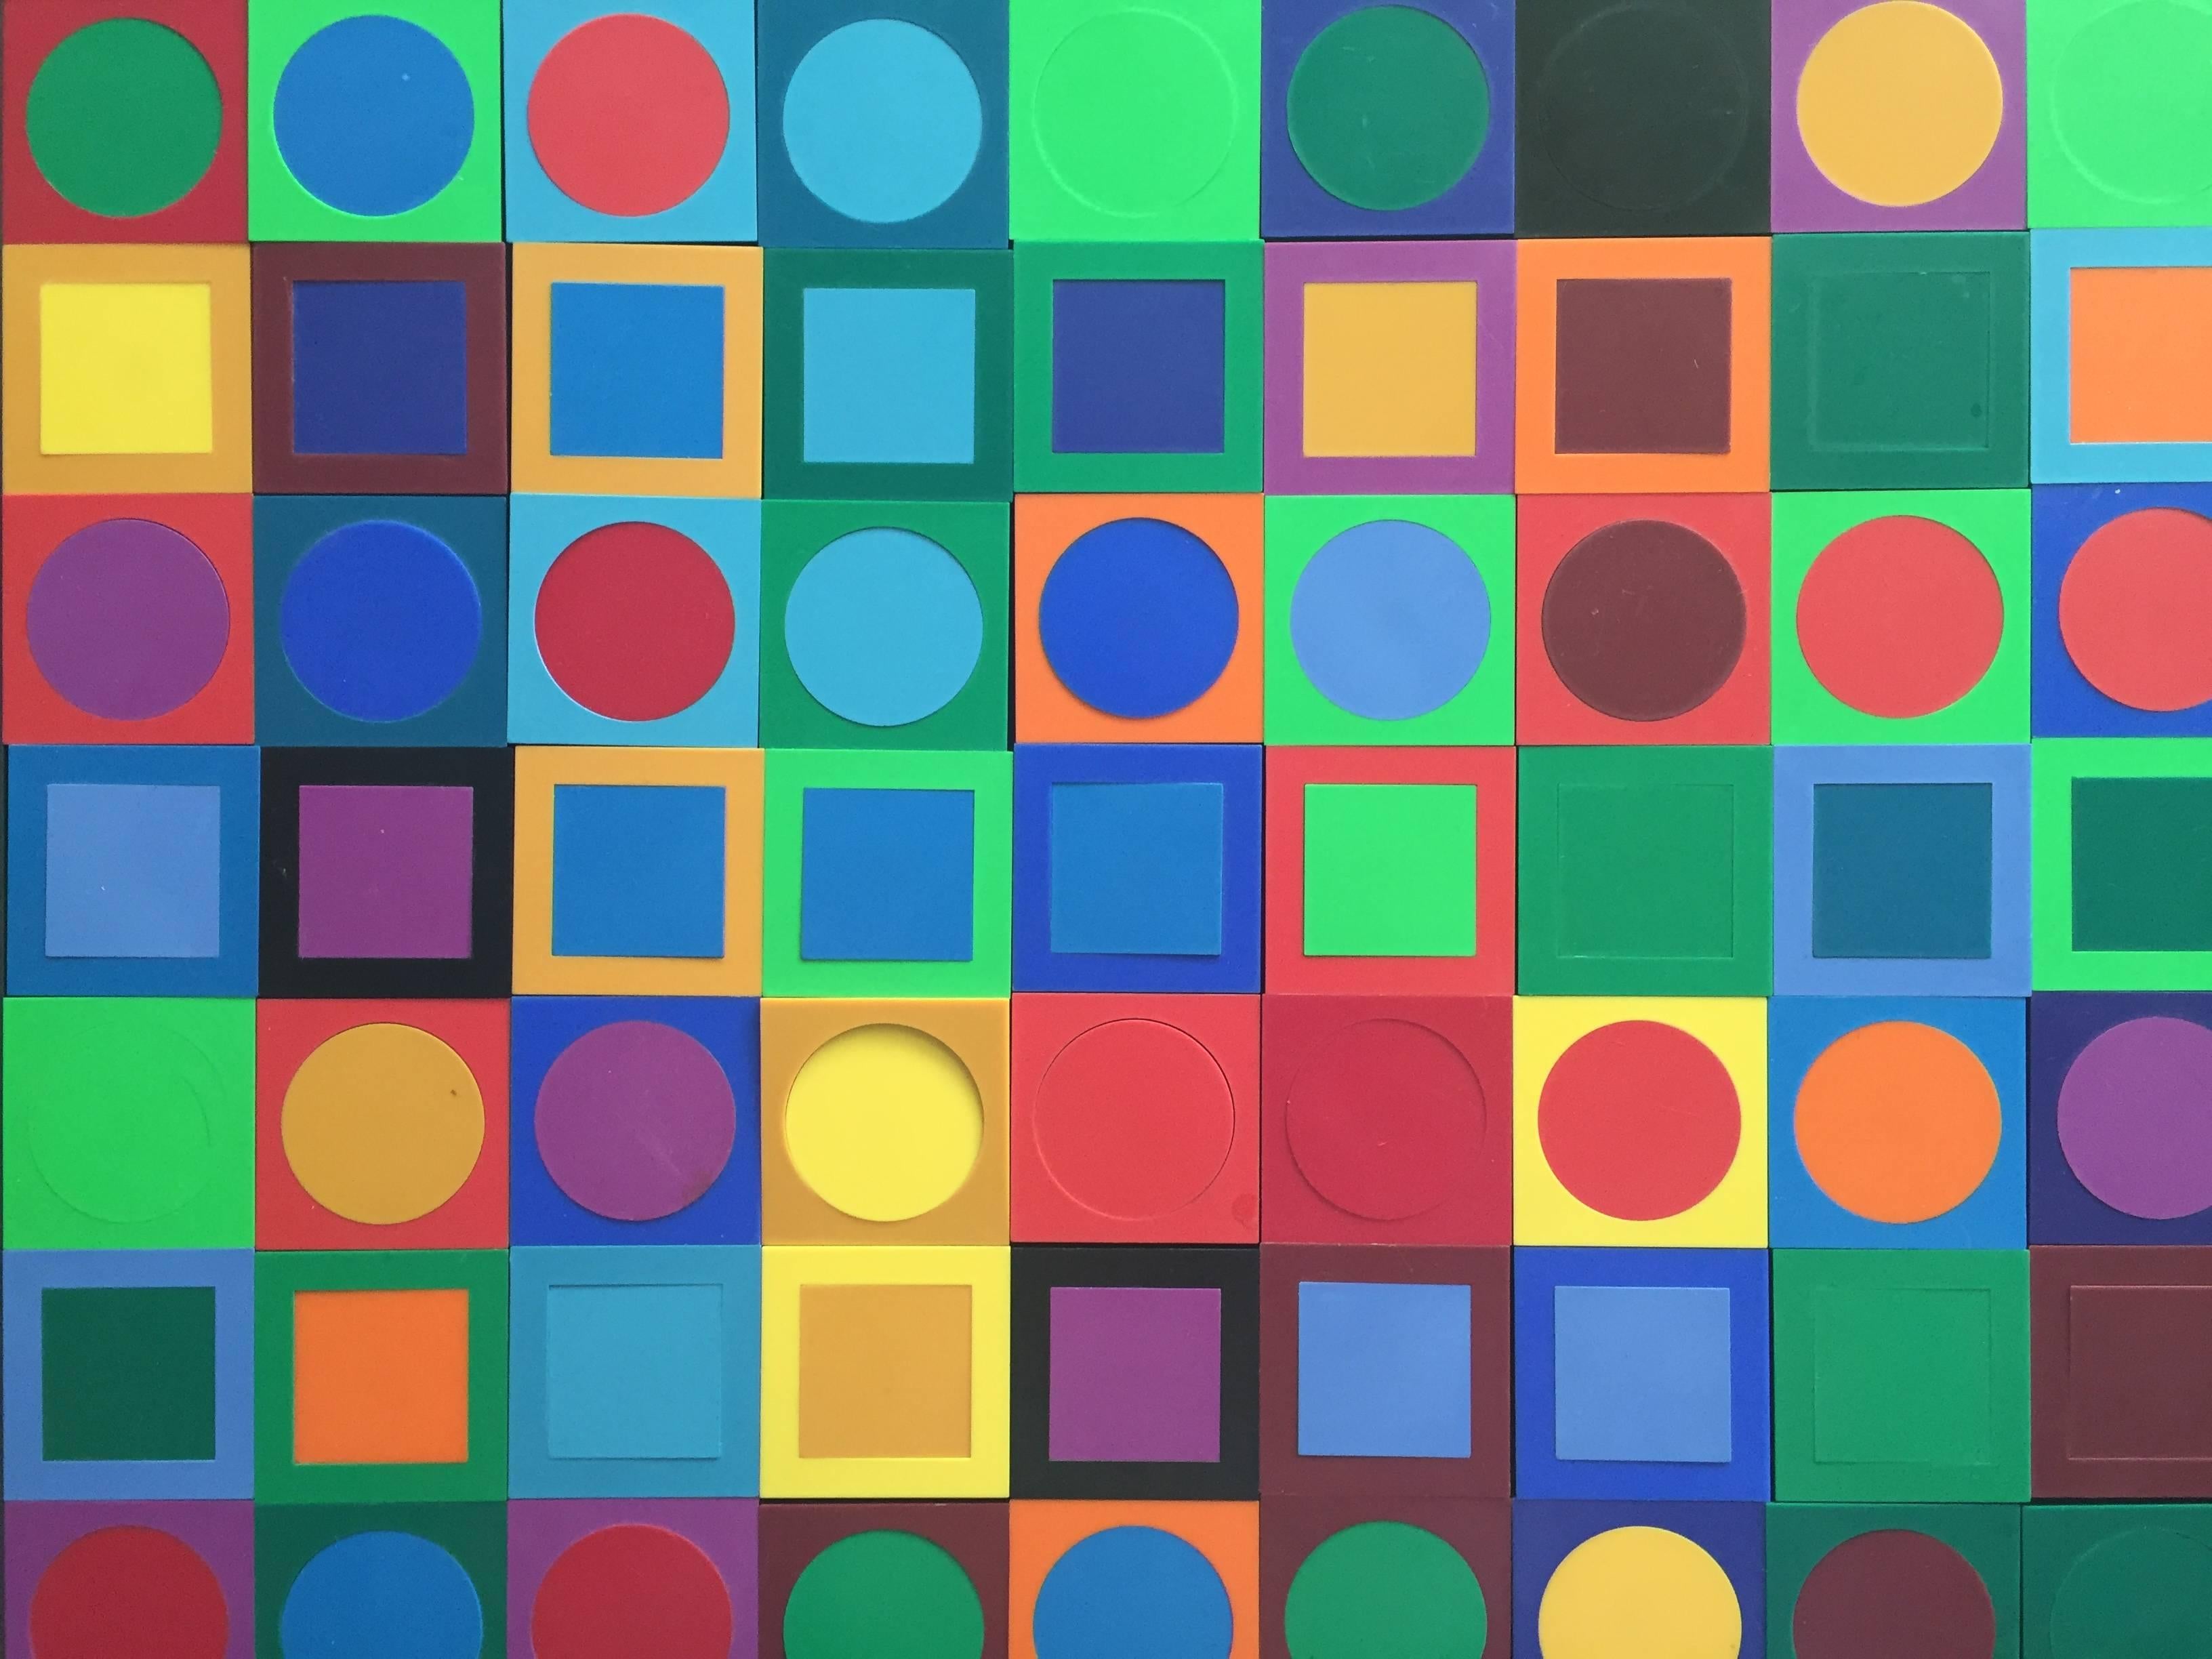  Planetary Folklore Participations No. 1  - Op Art Mixed Media Art by Victor Vasarely